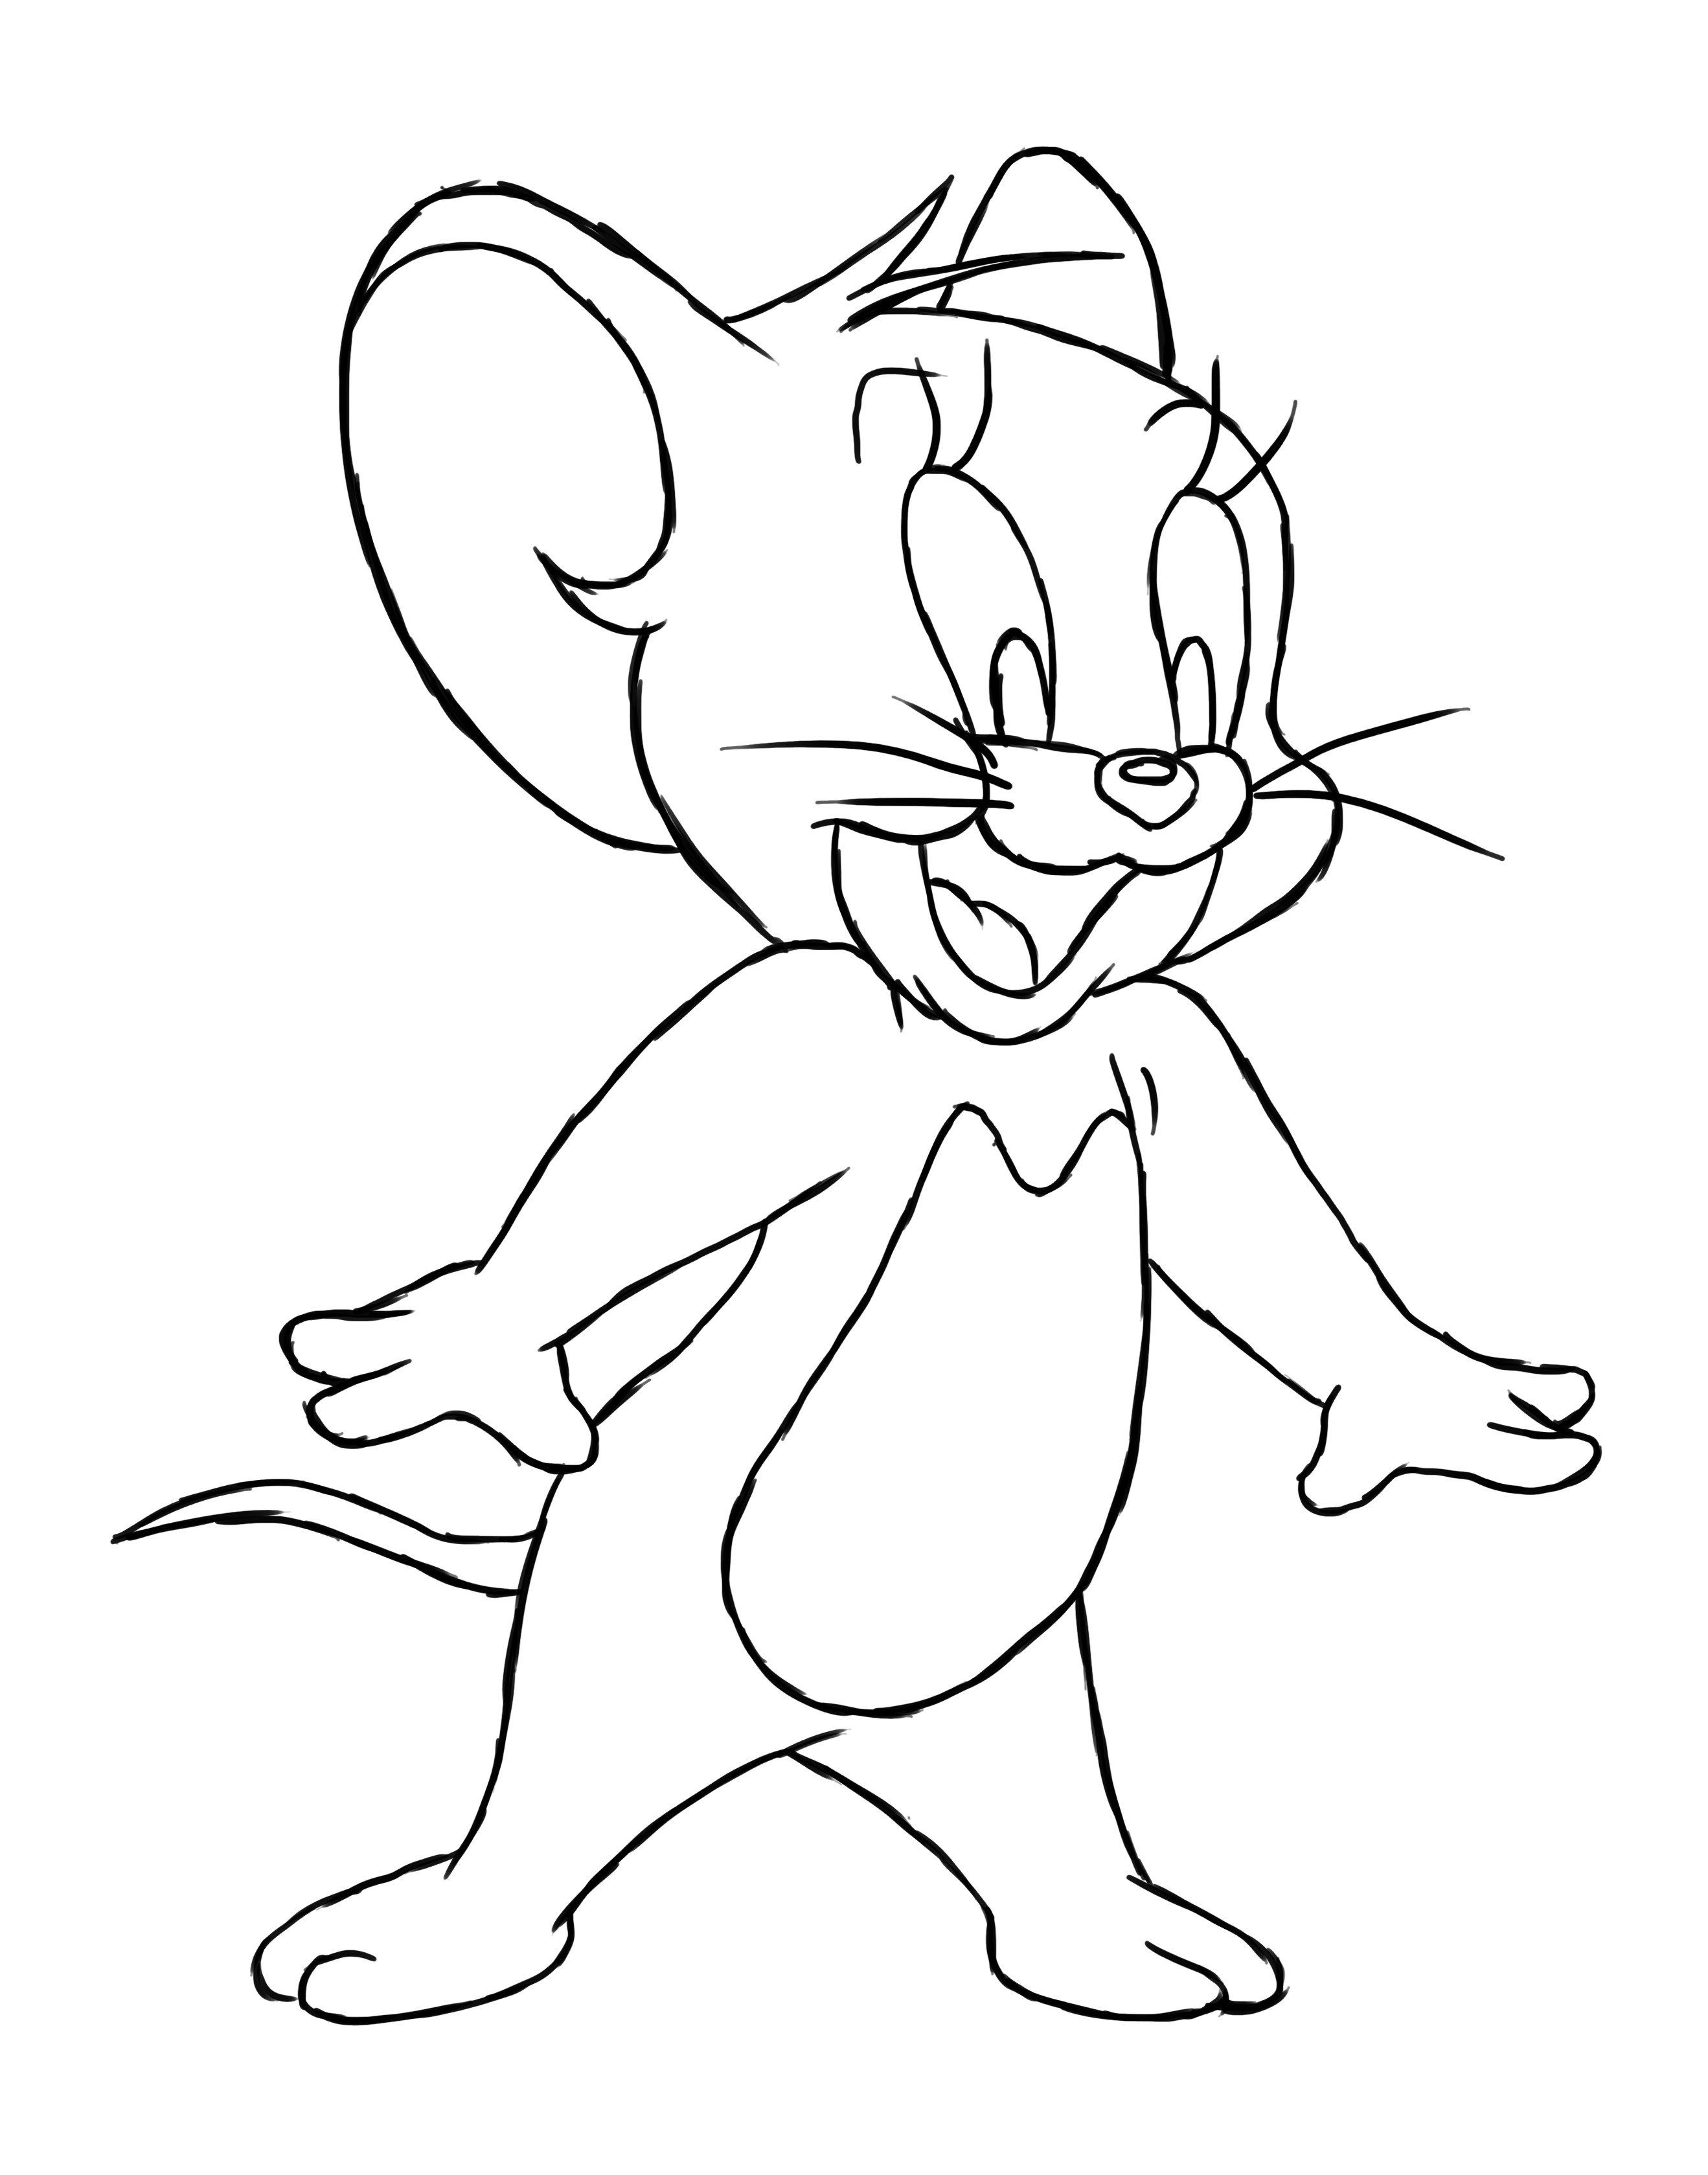 Tom and Jerry Drawing, Pencil, Sketch, Colorful, Realistic Art Images